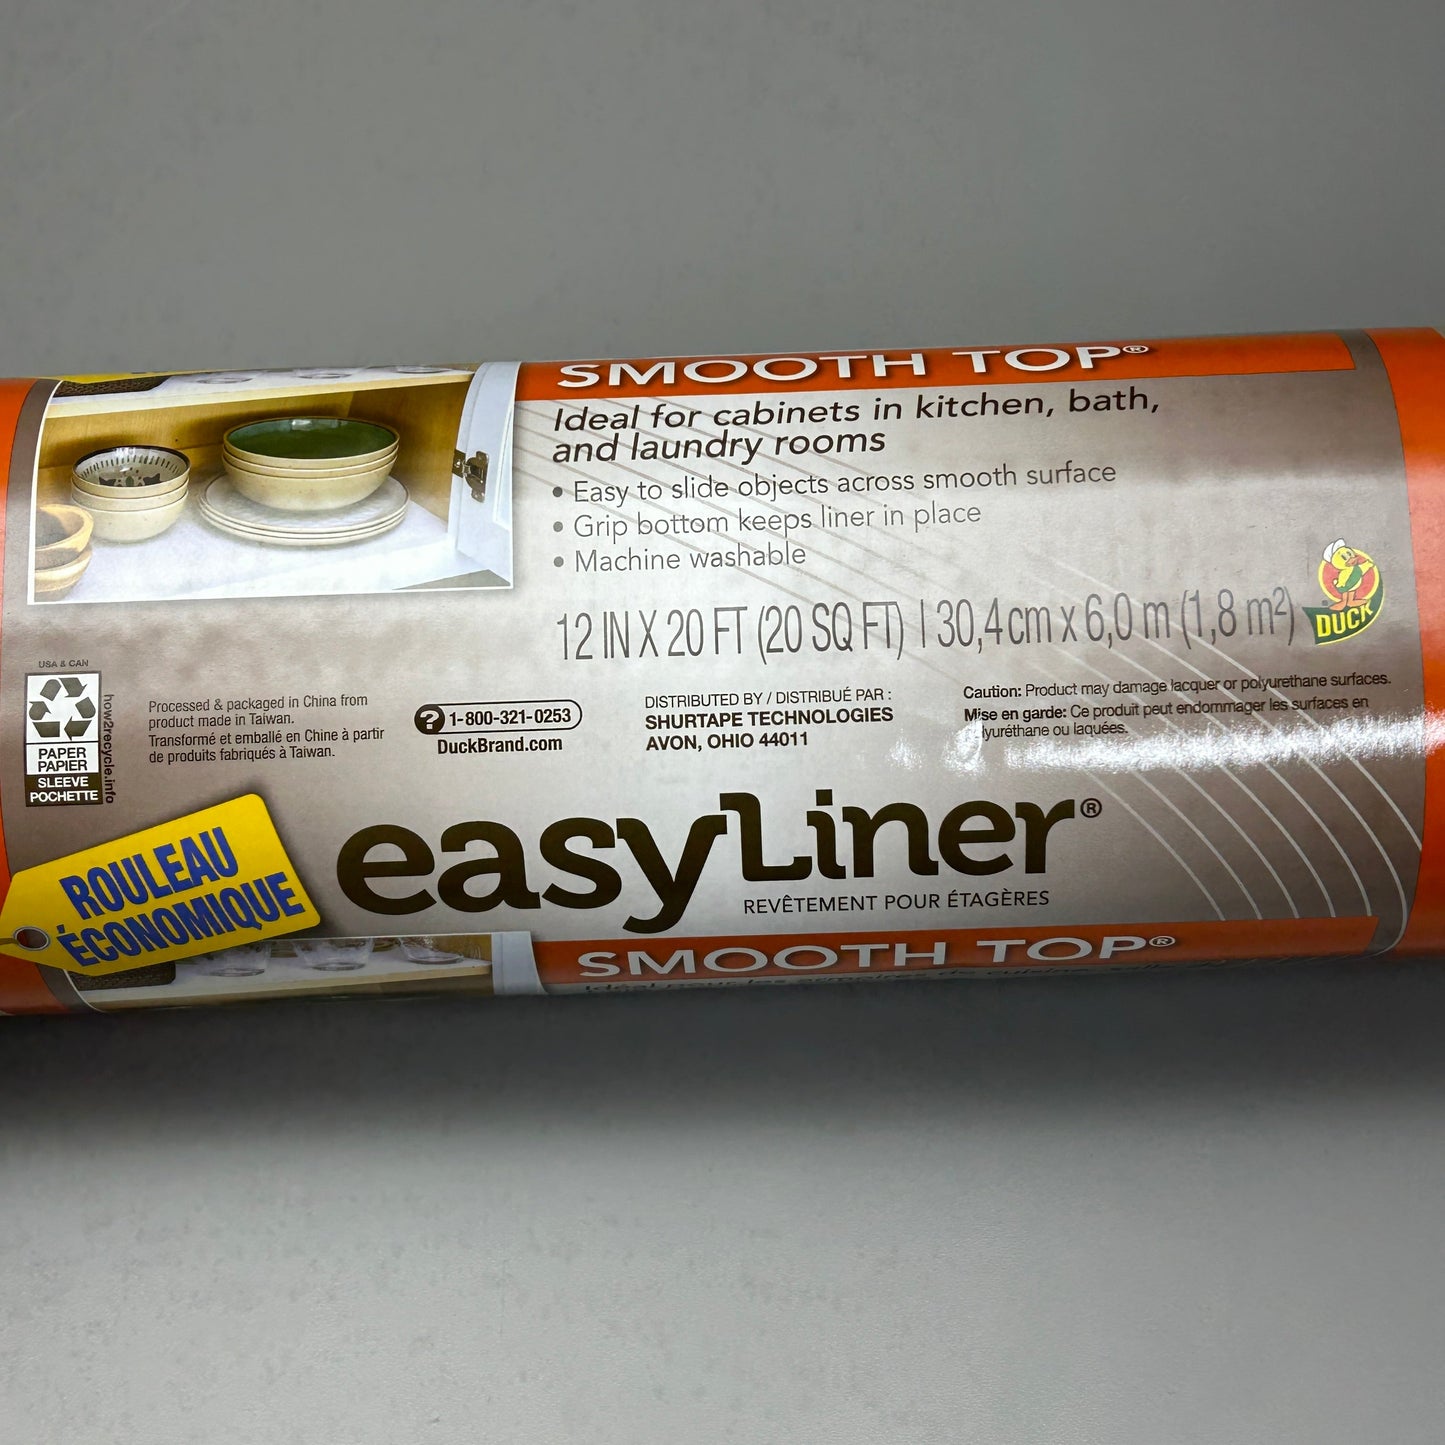 DUCK BRAND Easy Liner Shelf Liner Smooth Top Taupe 12 in X 20 ft (New)